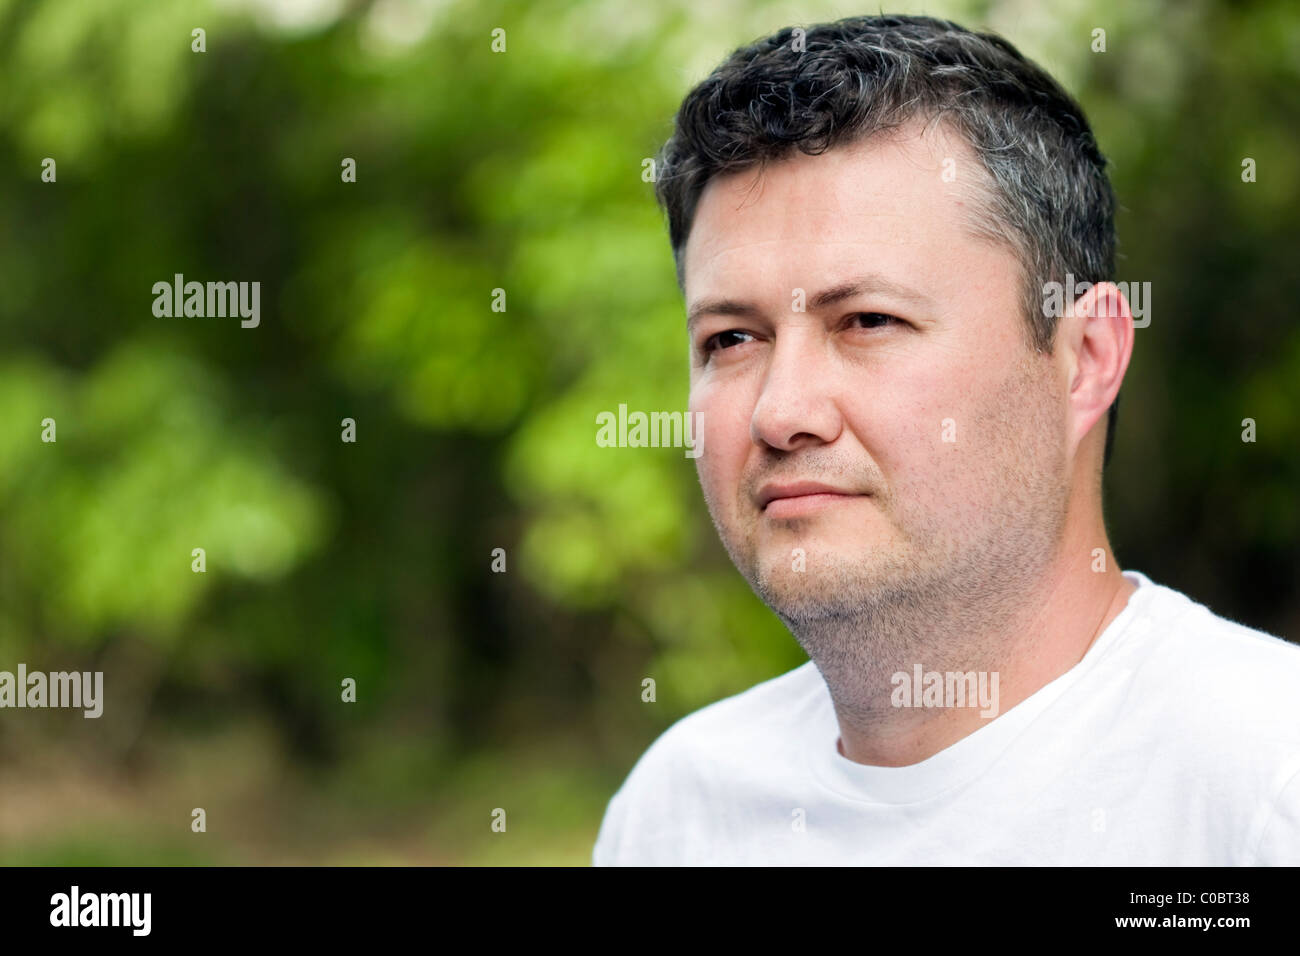 Enigmatic smile of an middle eastern man Stock Photo